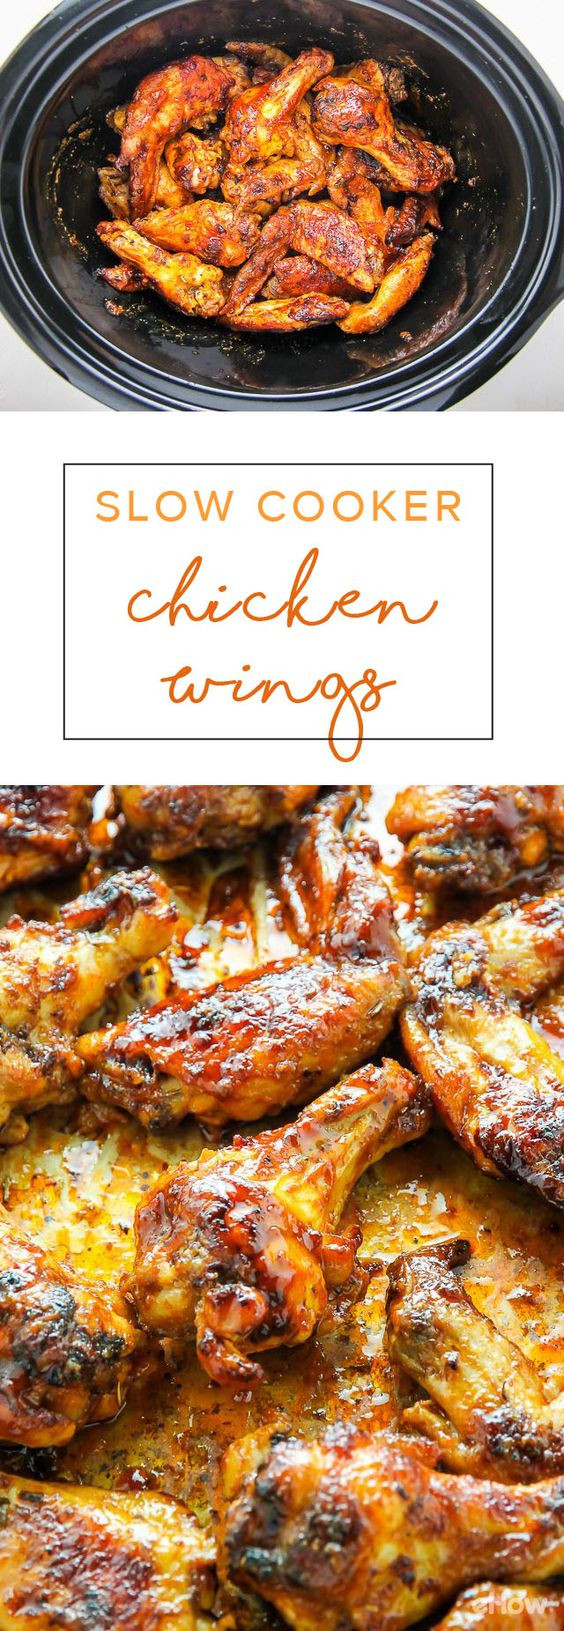 Easy Slow Cooker Chicken Wings Recipe
 Smart Slow Cooker Recipes